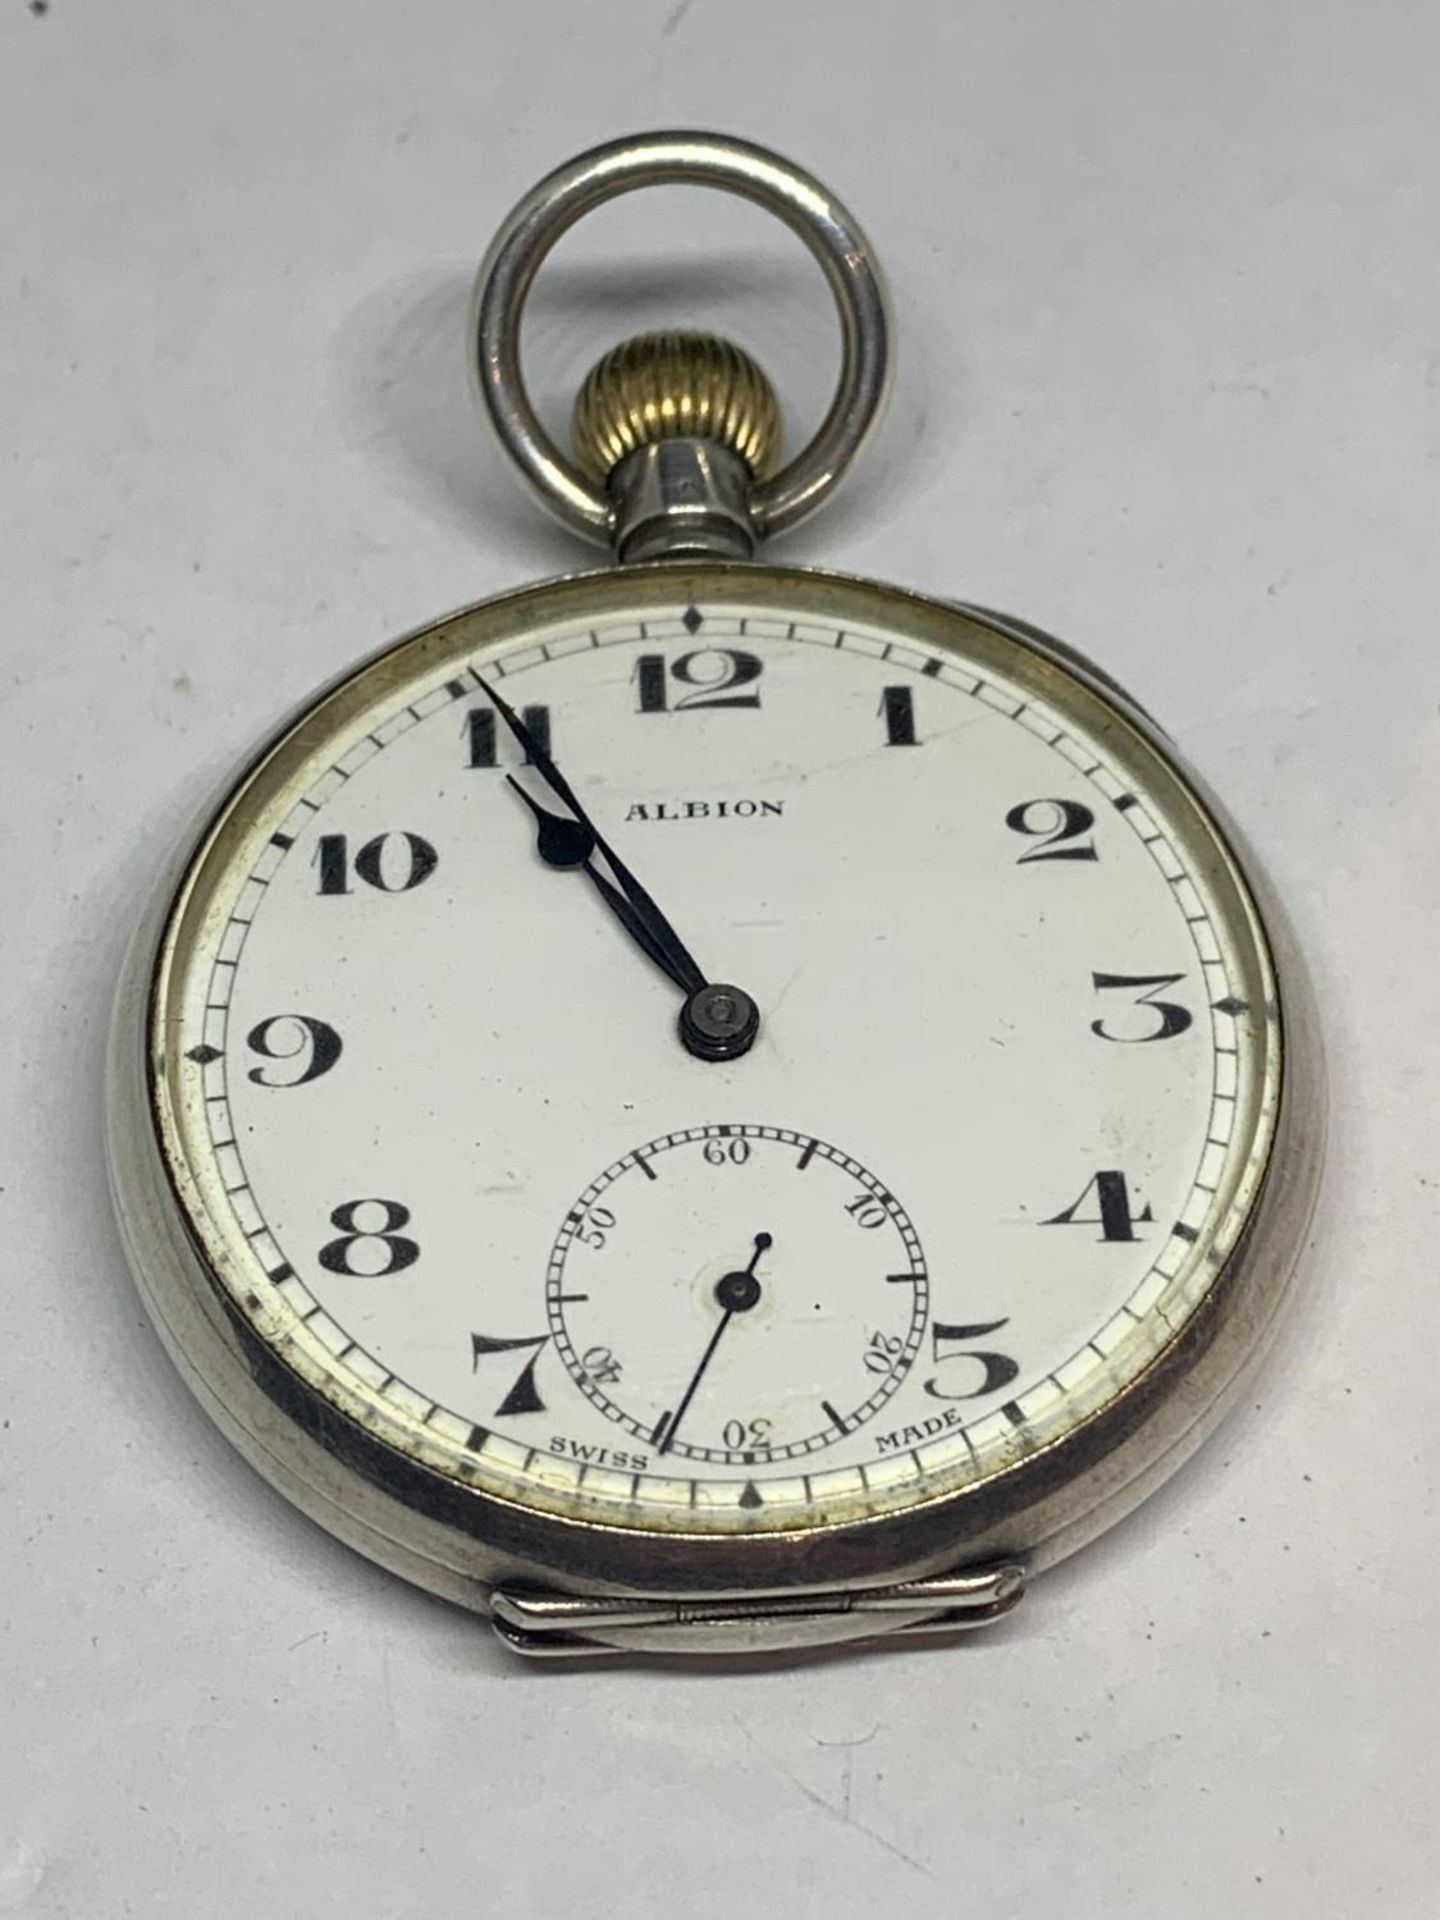 A MAKED 925 SILVER ALBION POCKET WATCH